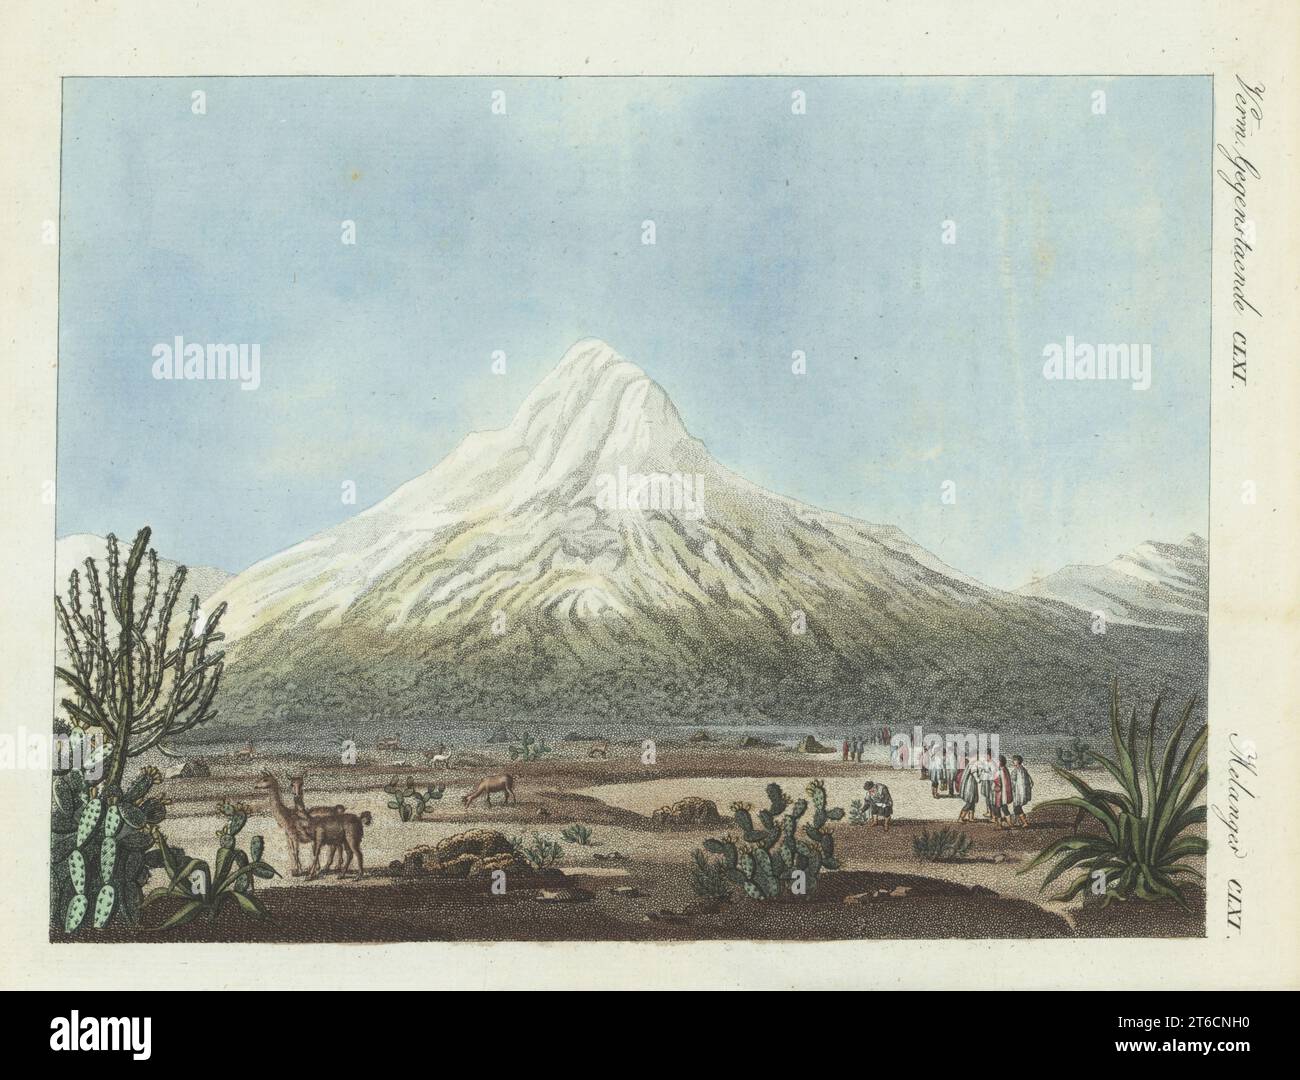 Chimborazo viewed from the Tapia plateau. Snow-capped inactive stratovolcano in the Andes. In the foreground, Native Americans tend to lamas, cactus, agave, etc. Chimborasso in South America. Copied from Alexander von Humboldt's Vues des Cordilleres, 1810. Handcoloured copperplate engraving from Carl Bertuch's Bilderbuch fur Kinder (Picture Book for Children), Weimar, 1810. A 12-volume encyclopedia for children illustrated with almost 1,200 engraved plates on natural history, science, costume, mythology, etc., published from 1790-1830. Stock Photo